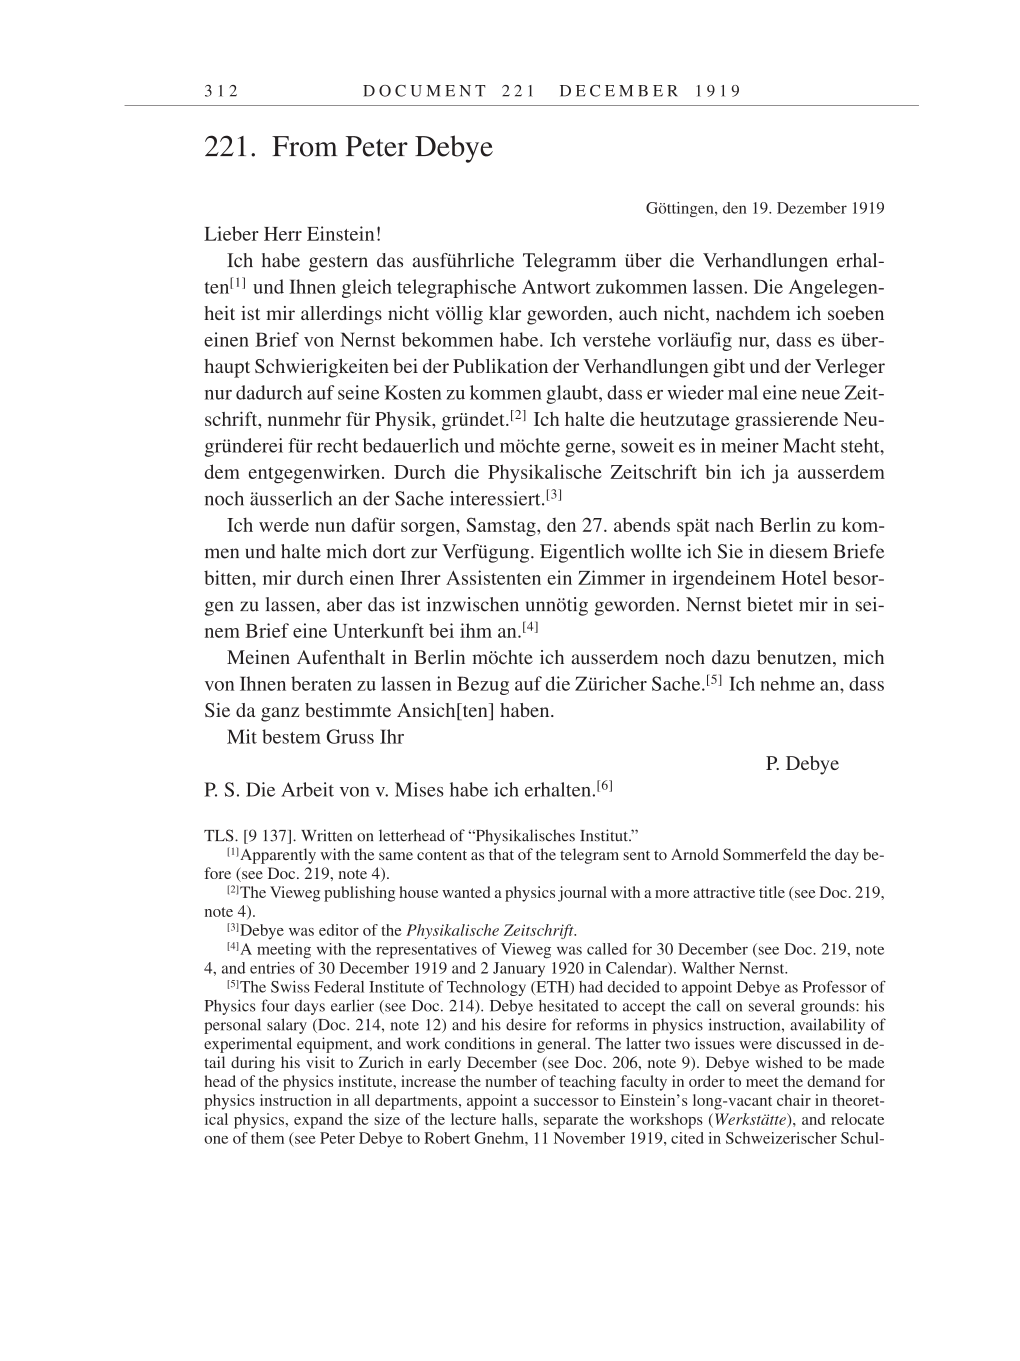 Volume 9: The Berlin Years: Correspondence January 1919-April 1920 page 312